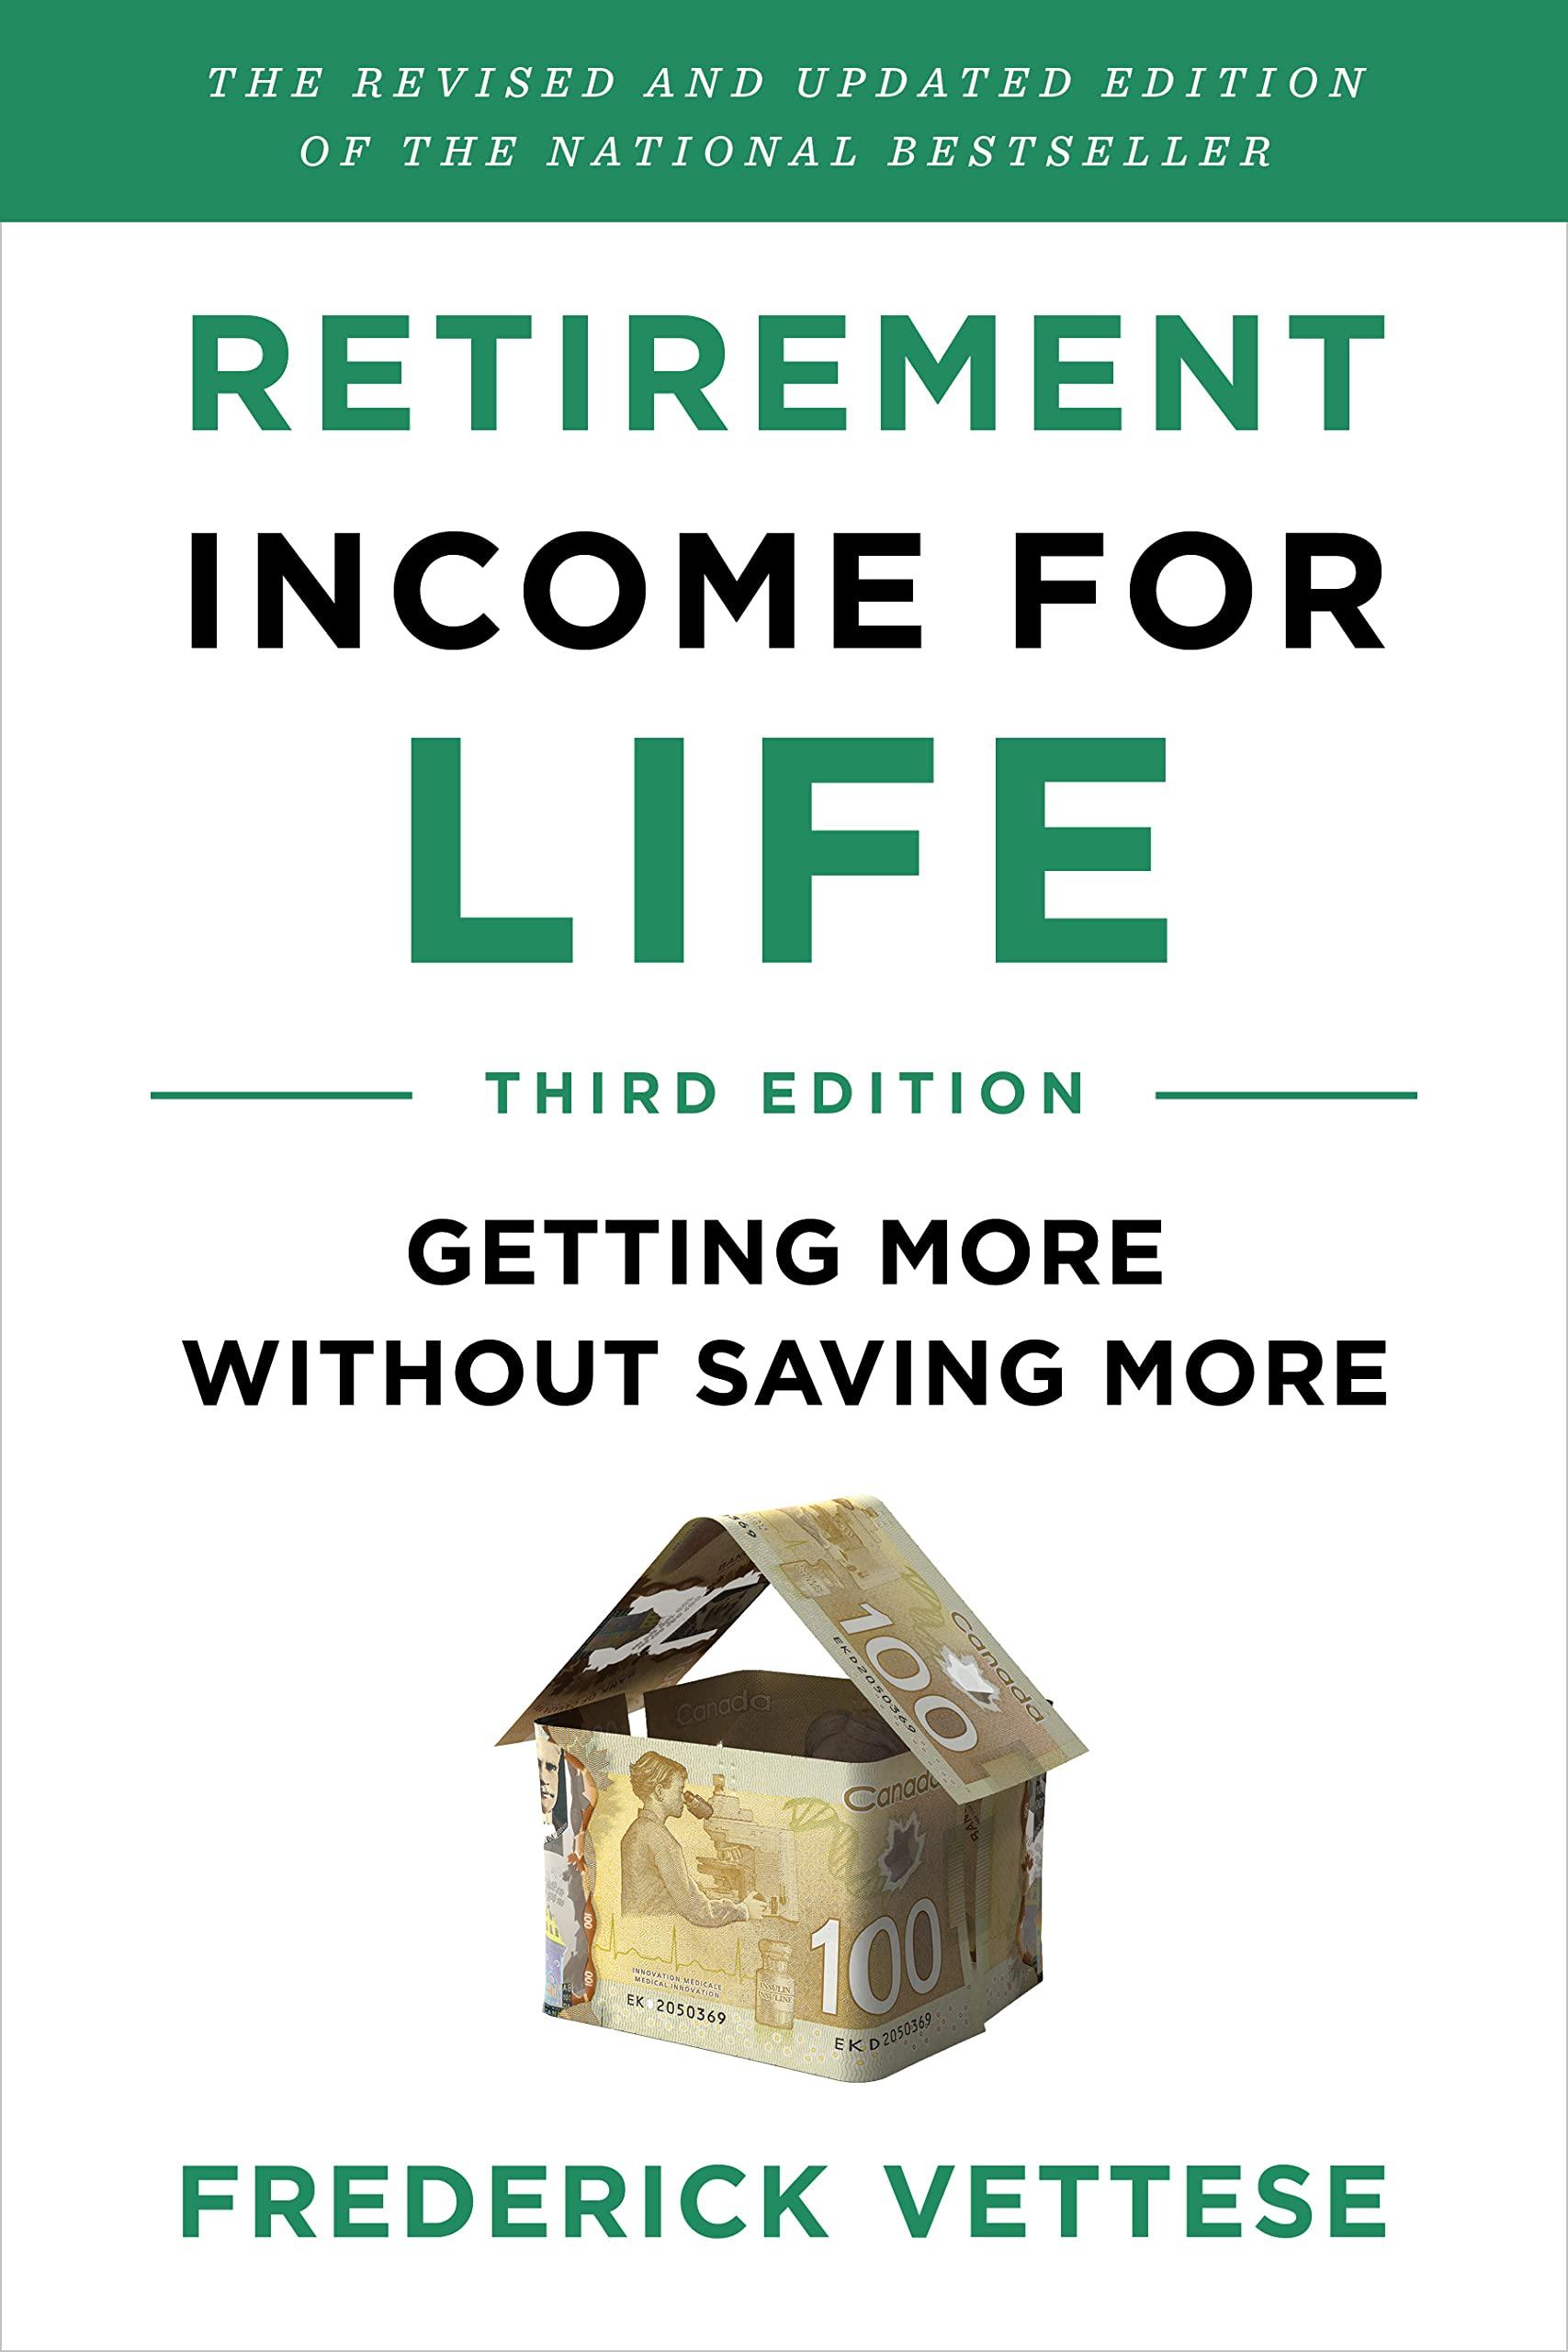 retirement income for life getting more without saving more 3rd edition frederick vettese 1770417176,